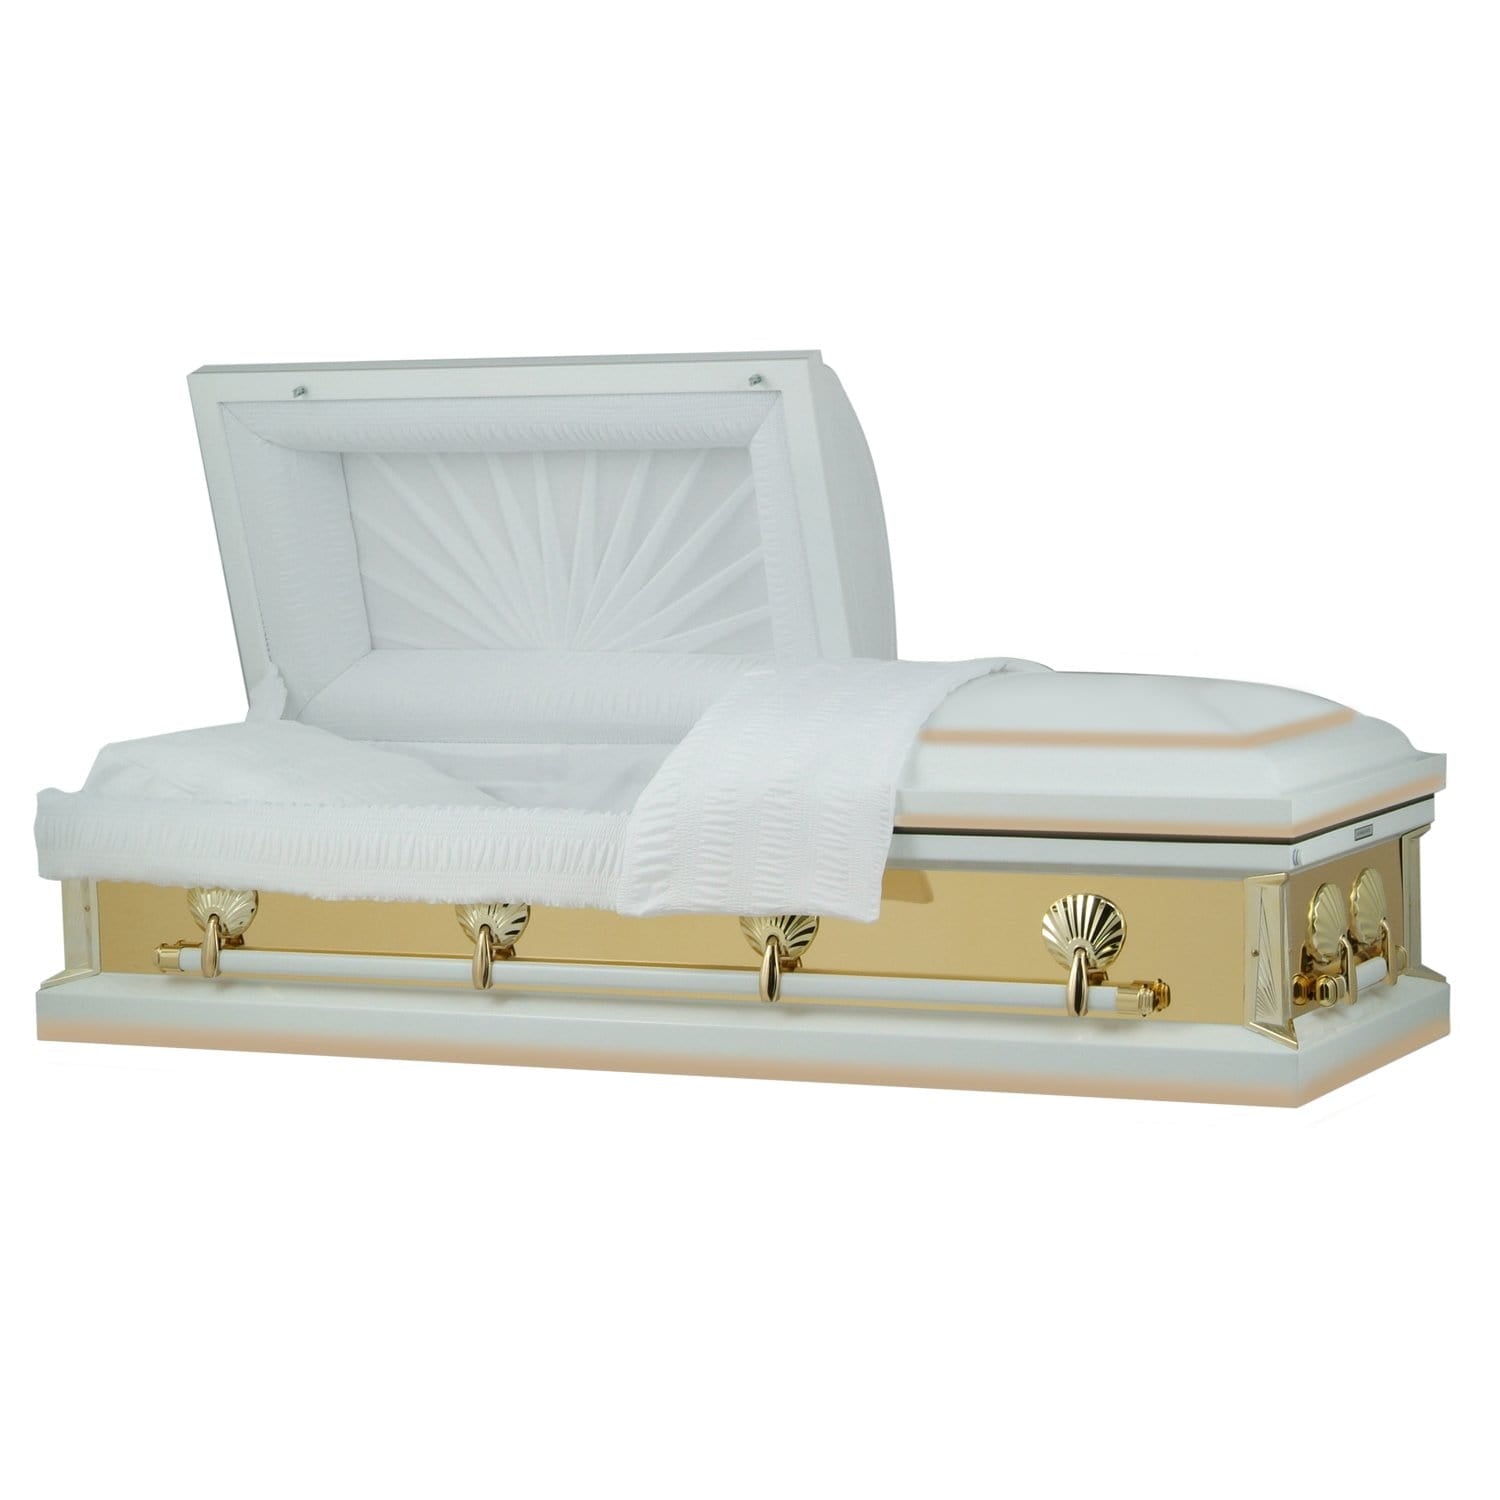 Reflections Series | White and Gold Steel Casket with White Interior - Titan Casket